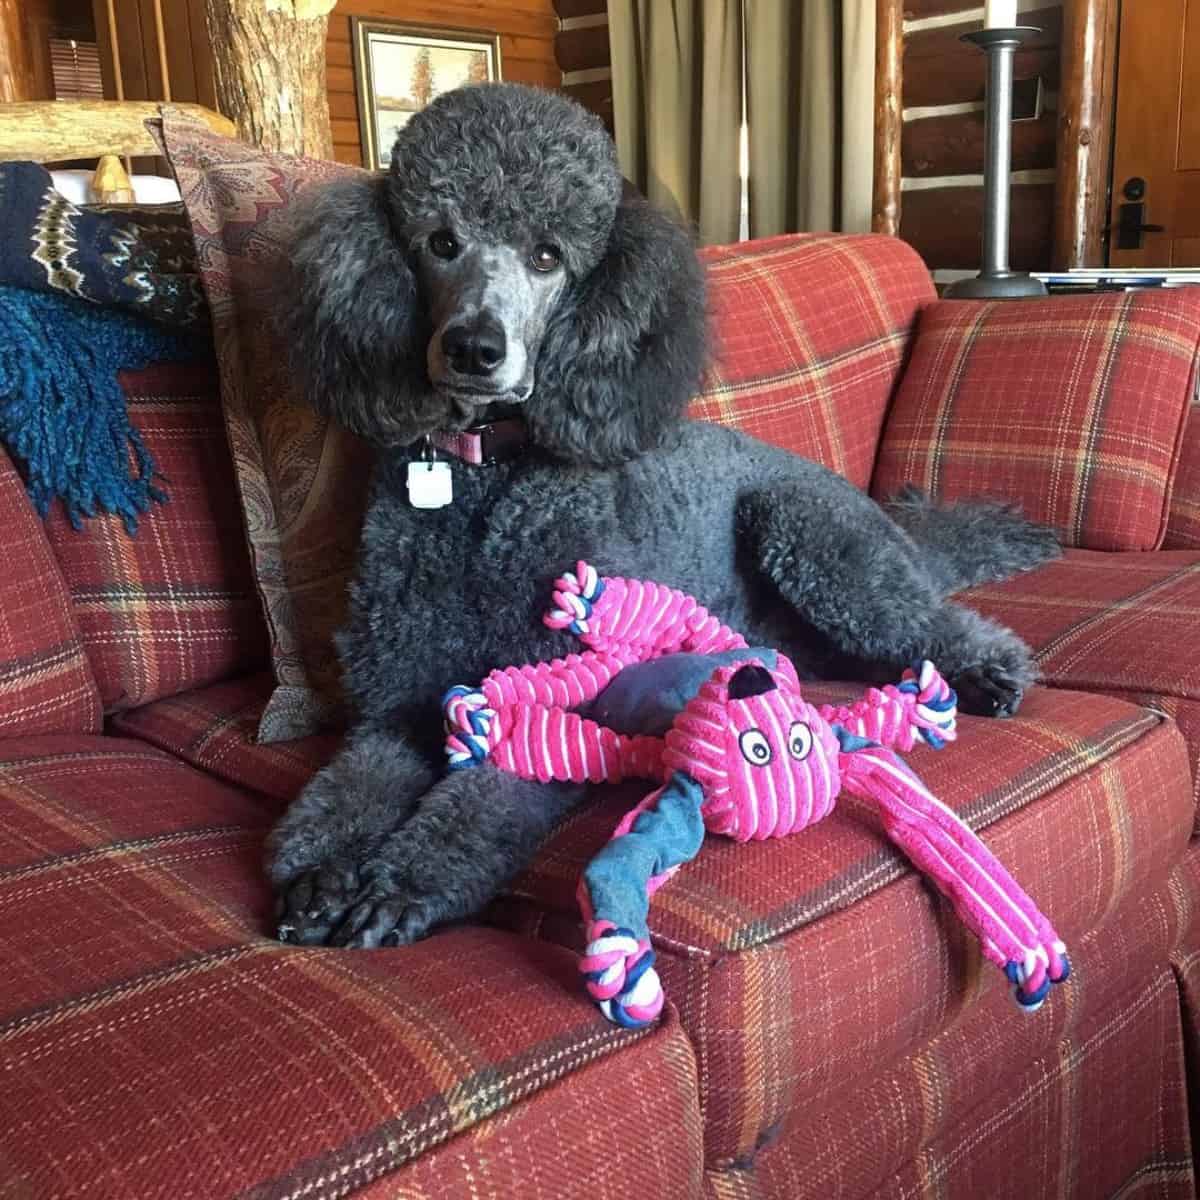 Standard Poodle on the couch